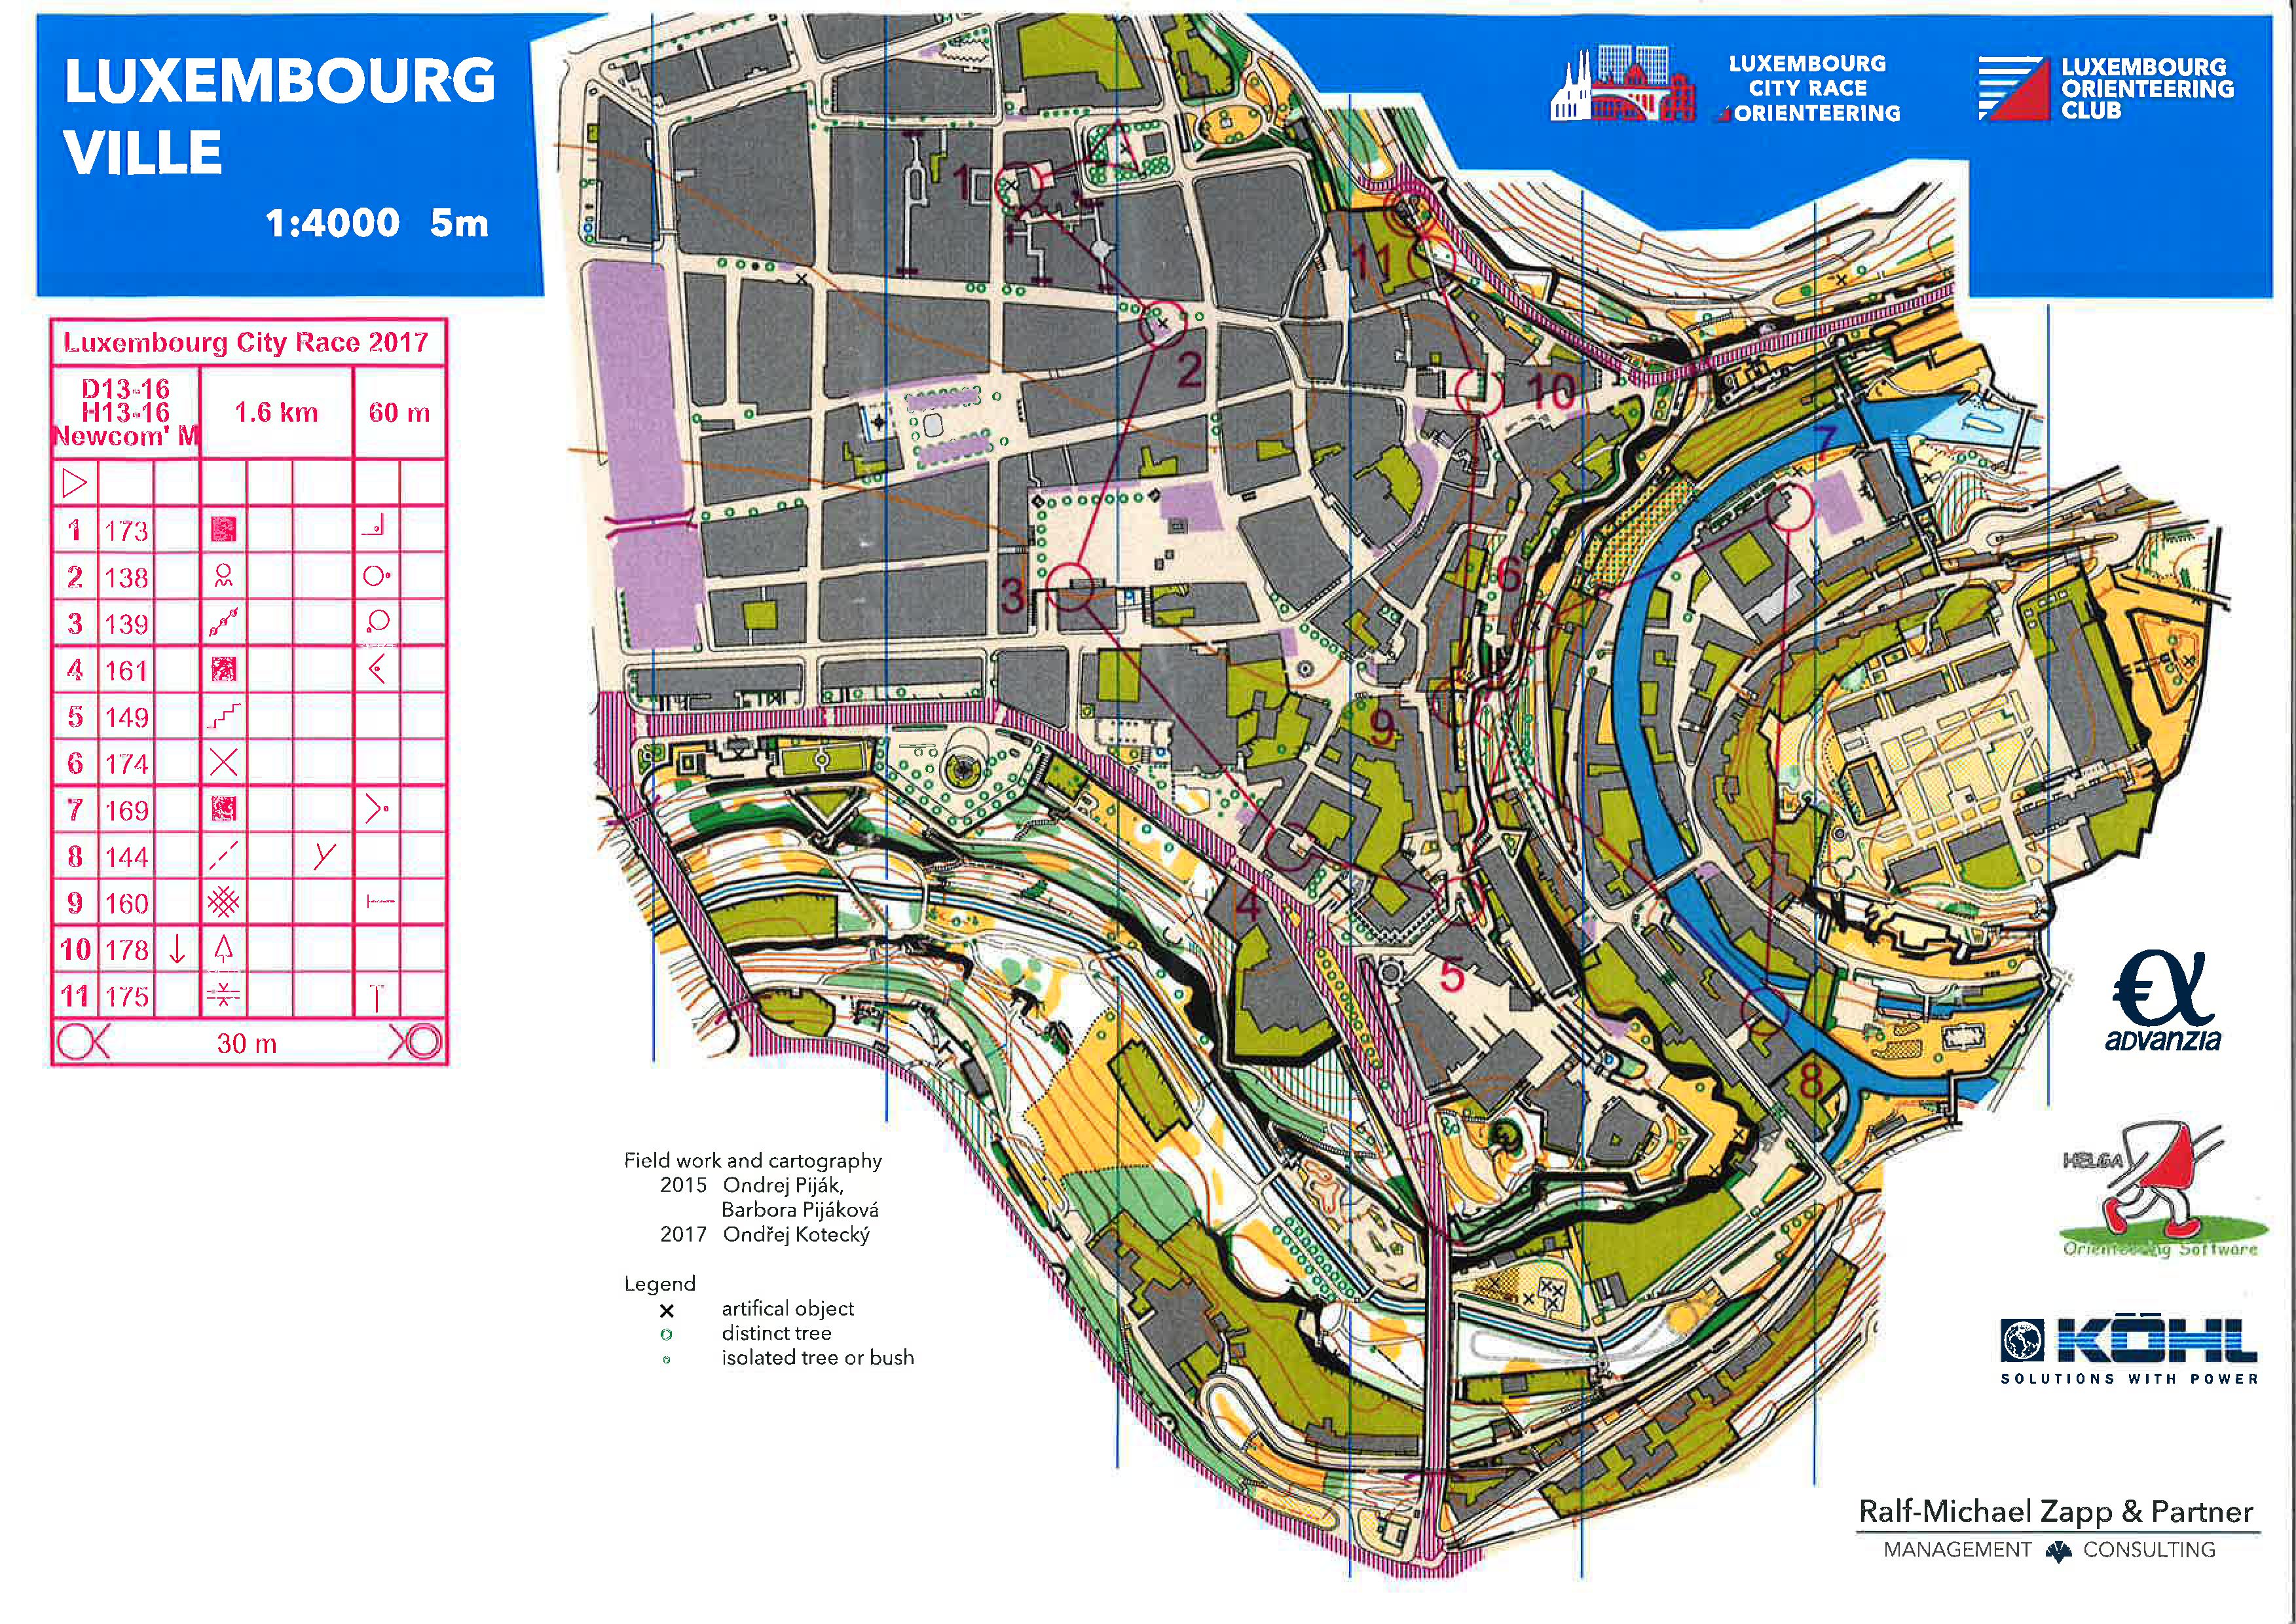 Luxembourg City Race (01/11/2017)